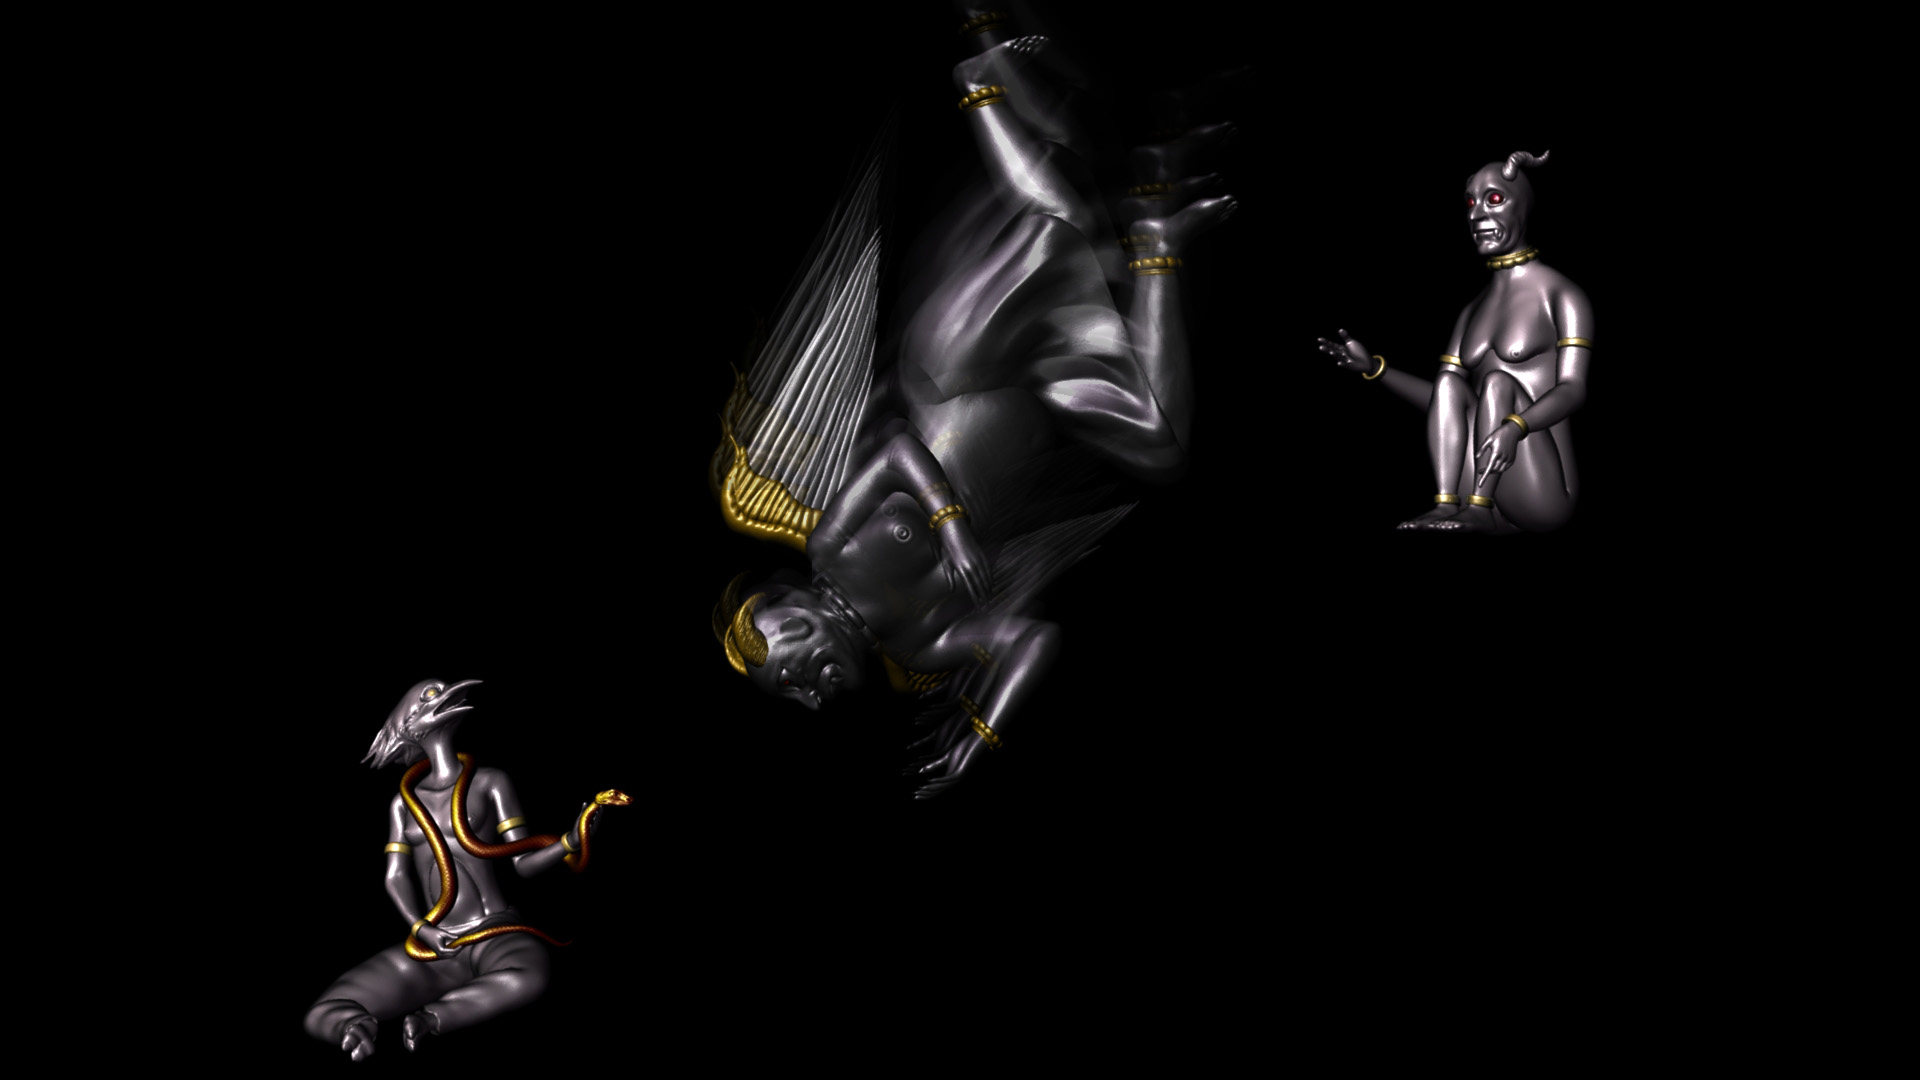 Three chrome-colored and gold sculpted figures diagonally displayed on an all black background.